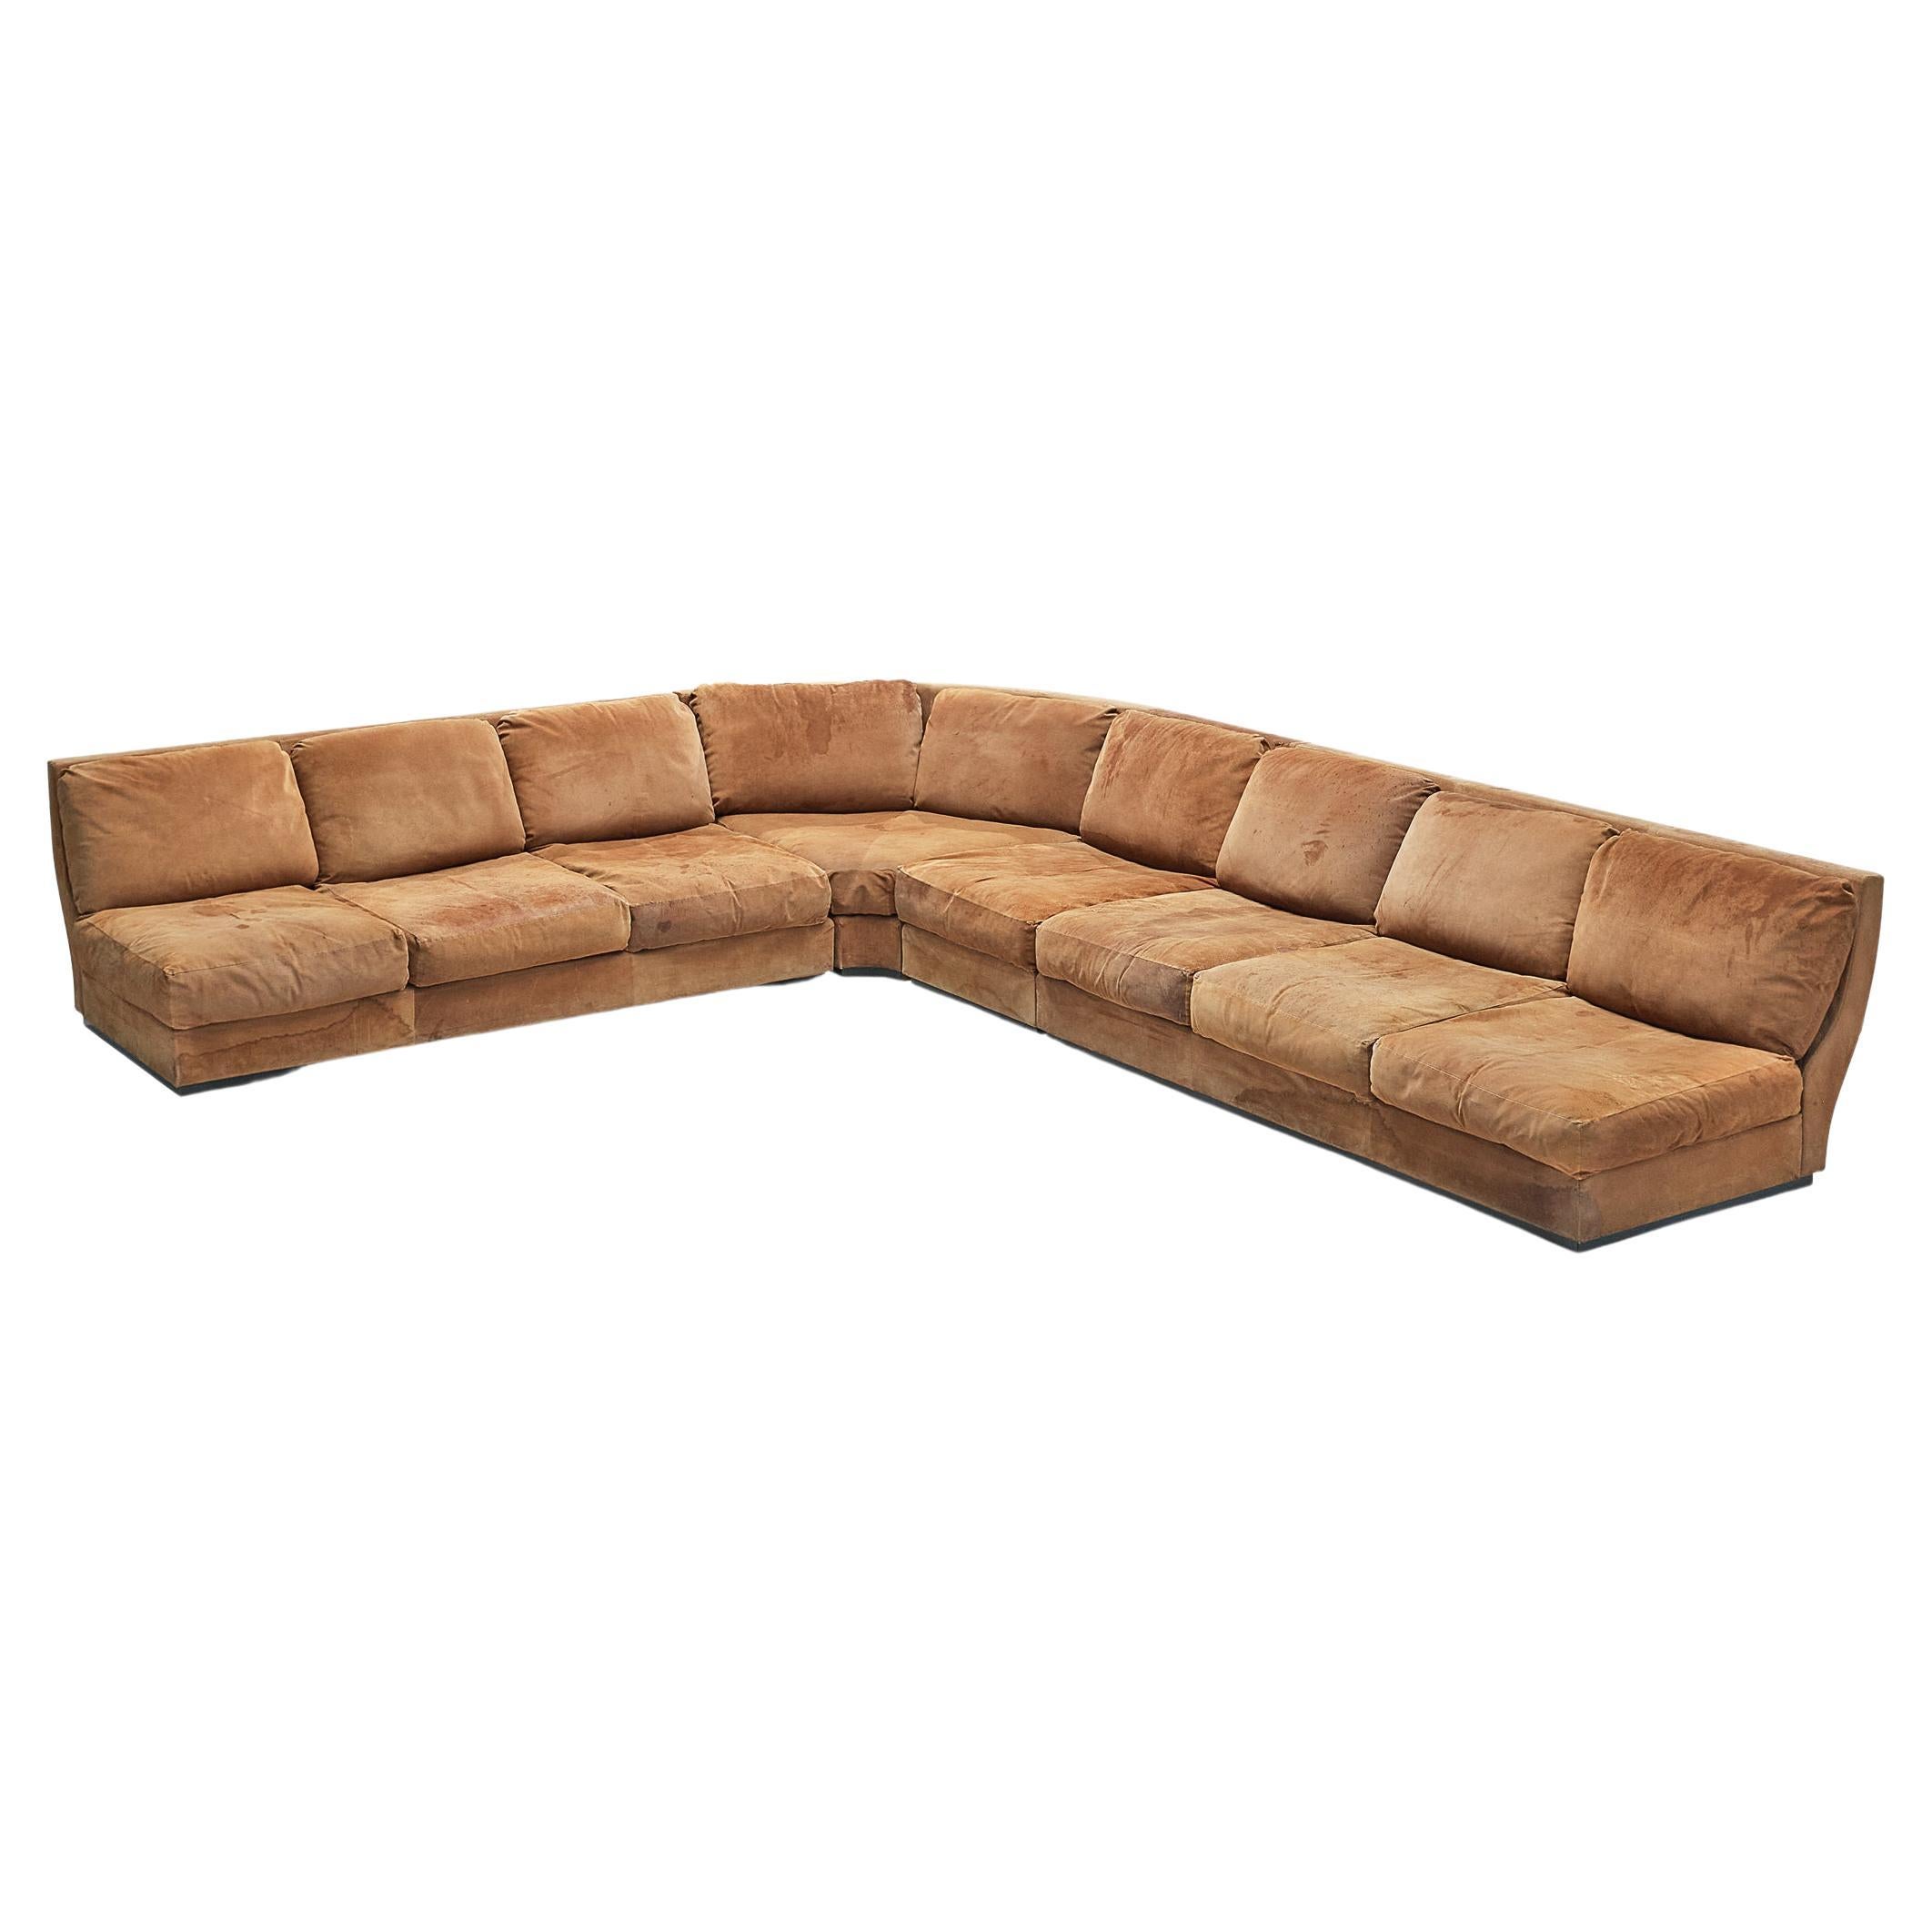 Willy Rizzo for Mario Sabot, sectional corner sofa, suede, Italy, 1970s. 

Grand modular corner sofa by Italian designer Willy Rizzo for Mario Sabot. This sofa is executed in beautiful warm cognac suede and consists out of two three-seater pieces,